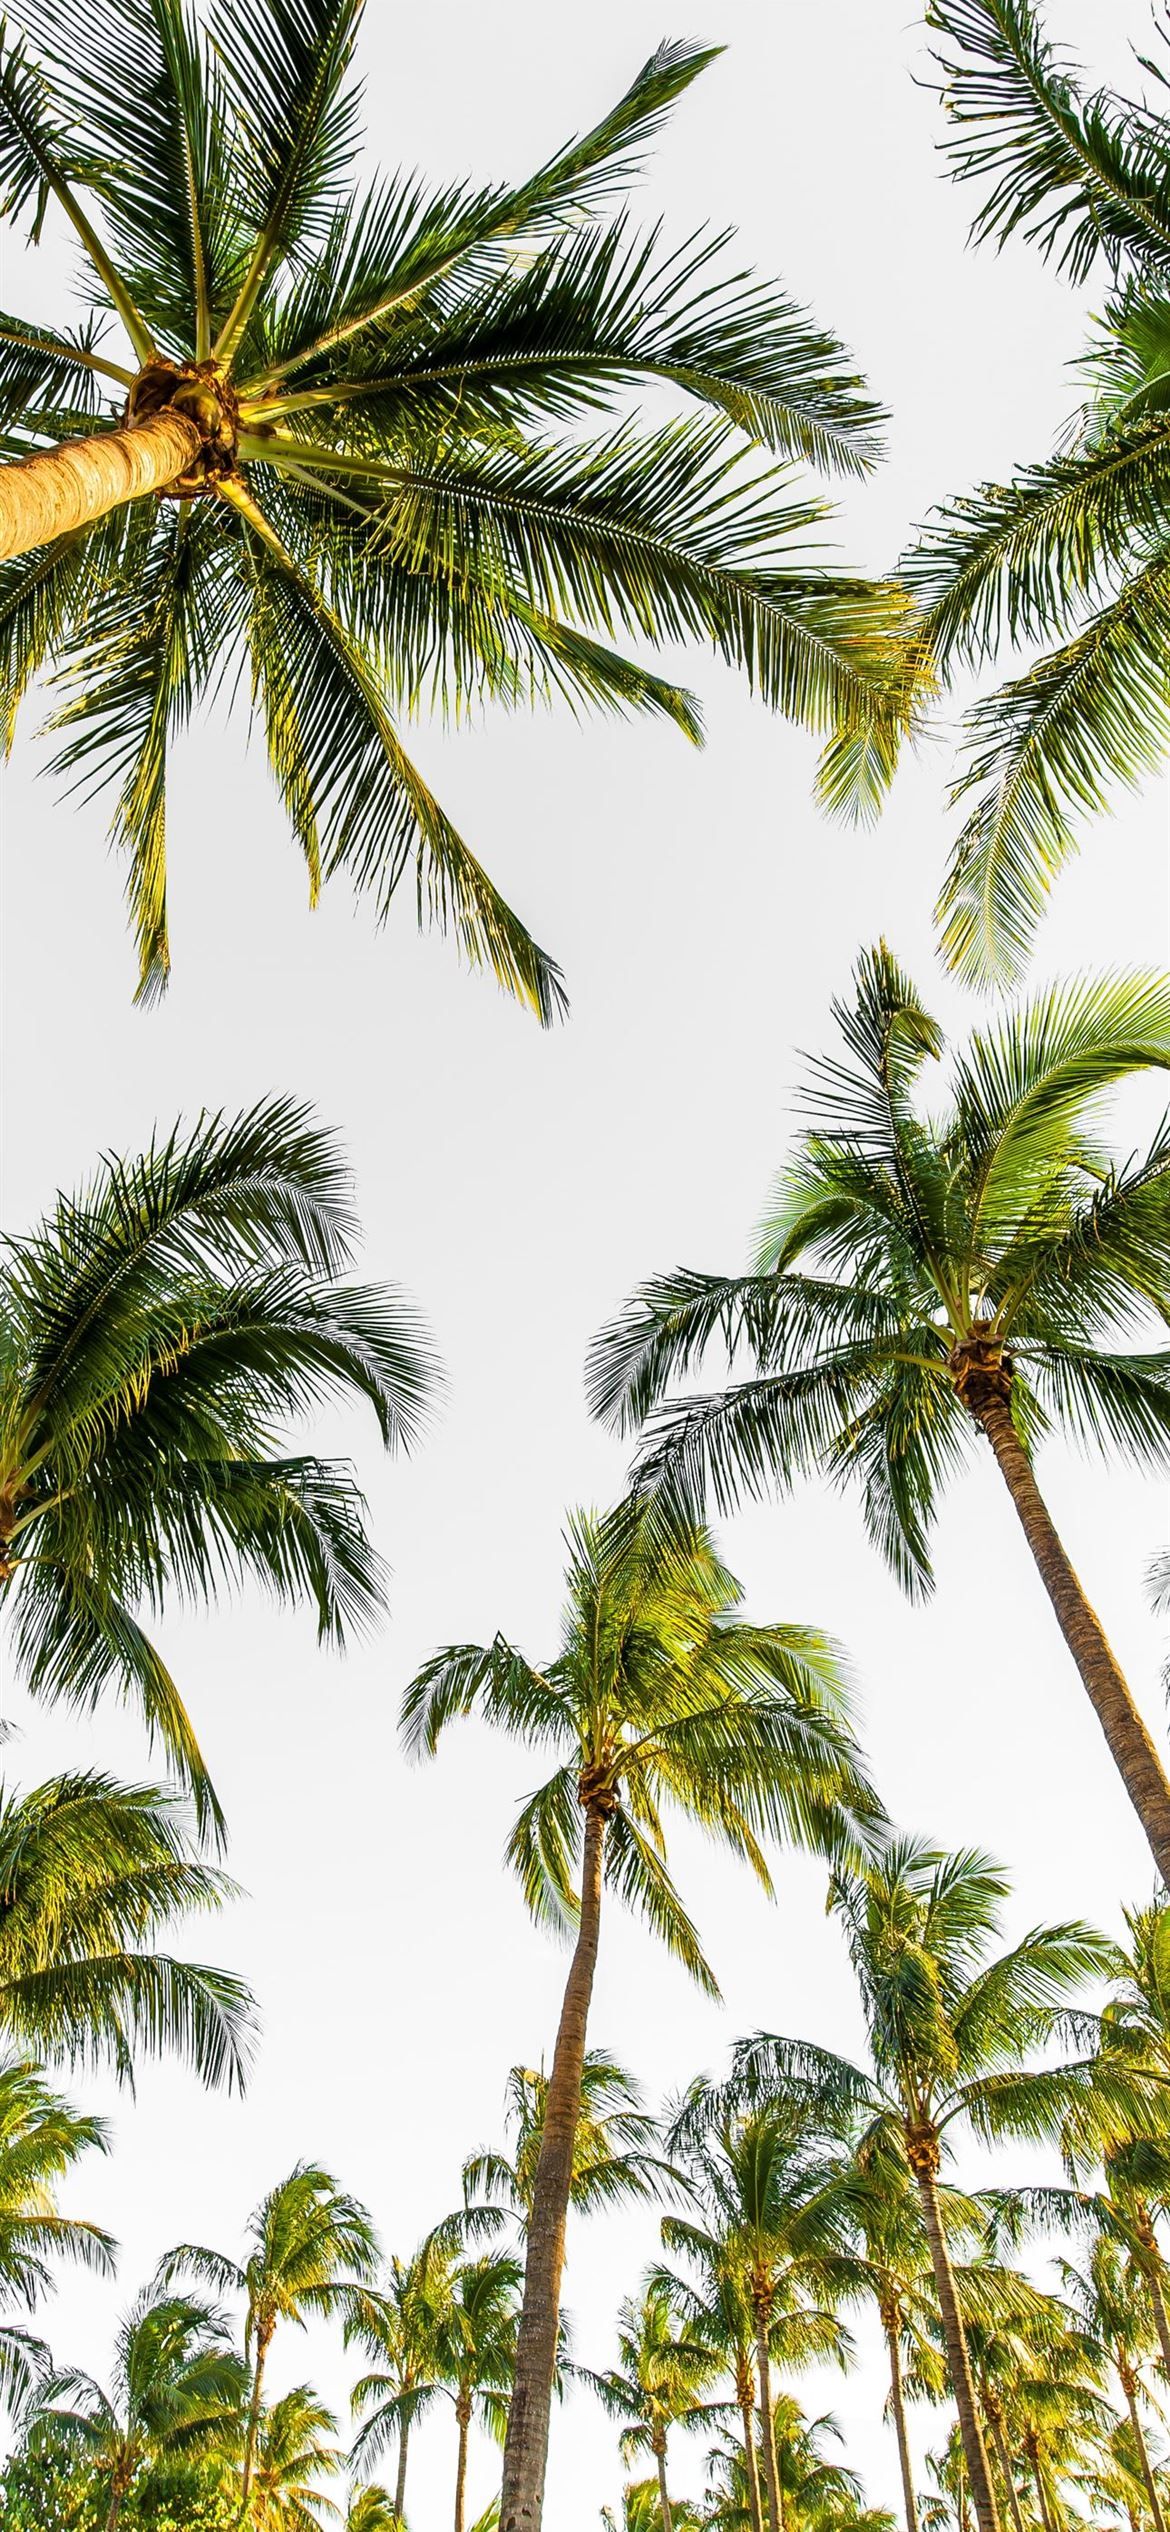 A photo of palm trees from the ground looking up at the sky - Palm tree, coconut